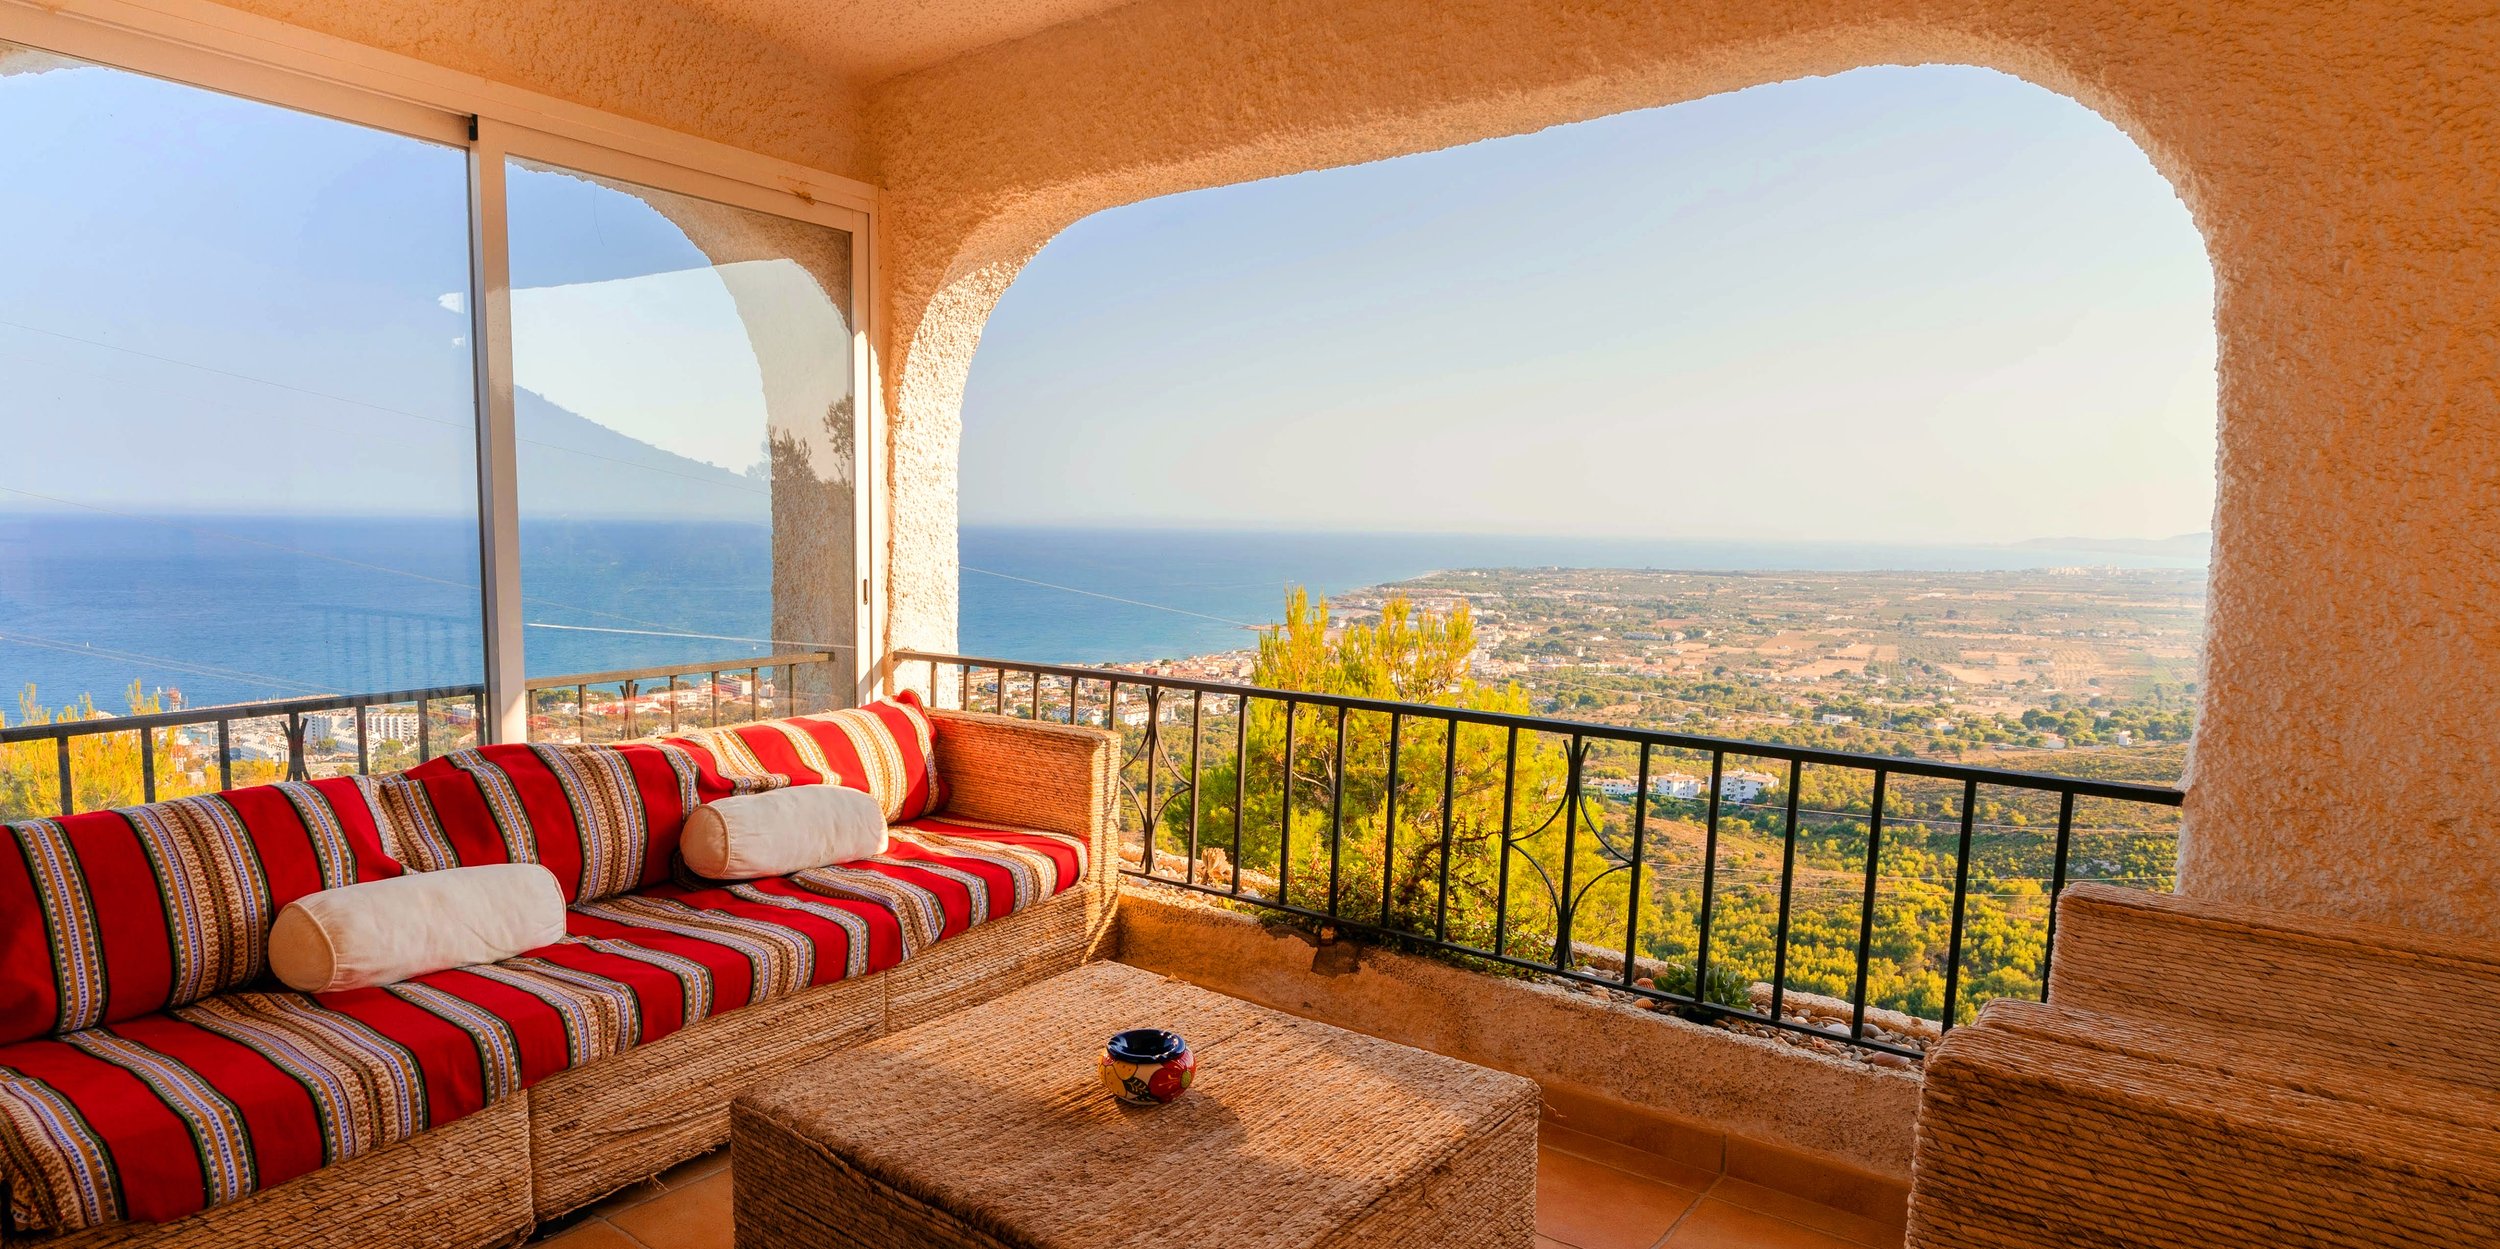 Balcony with a view of the Mediterranean Sea